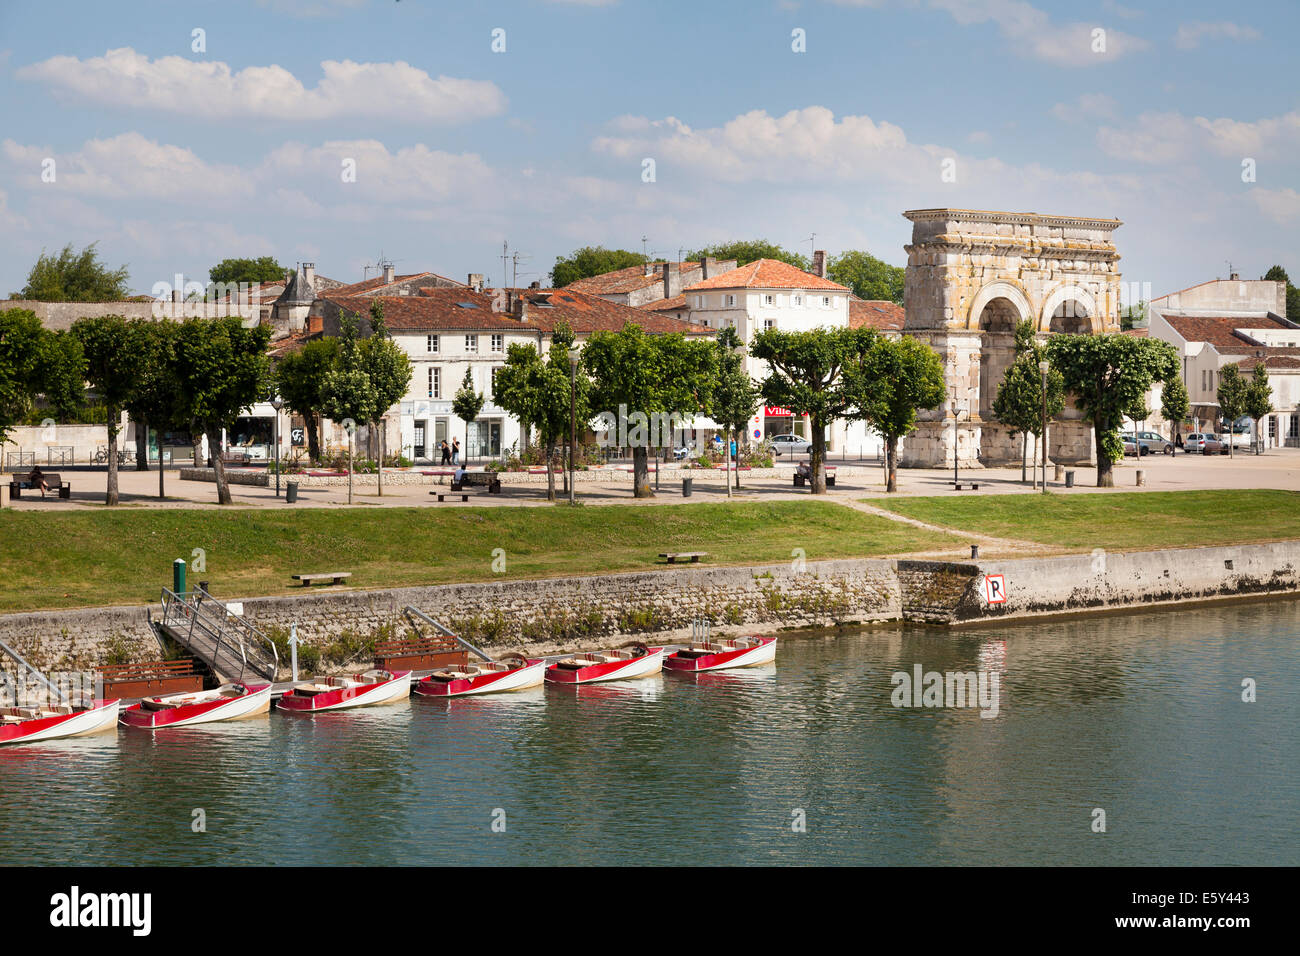 Arch of Germanicus on the right bank with moored pleasure boats on the River Charente. Stock Photo